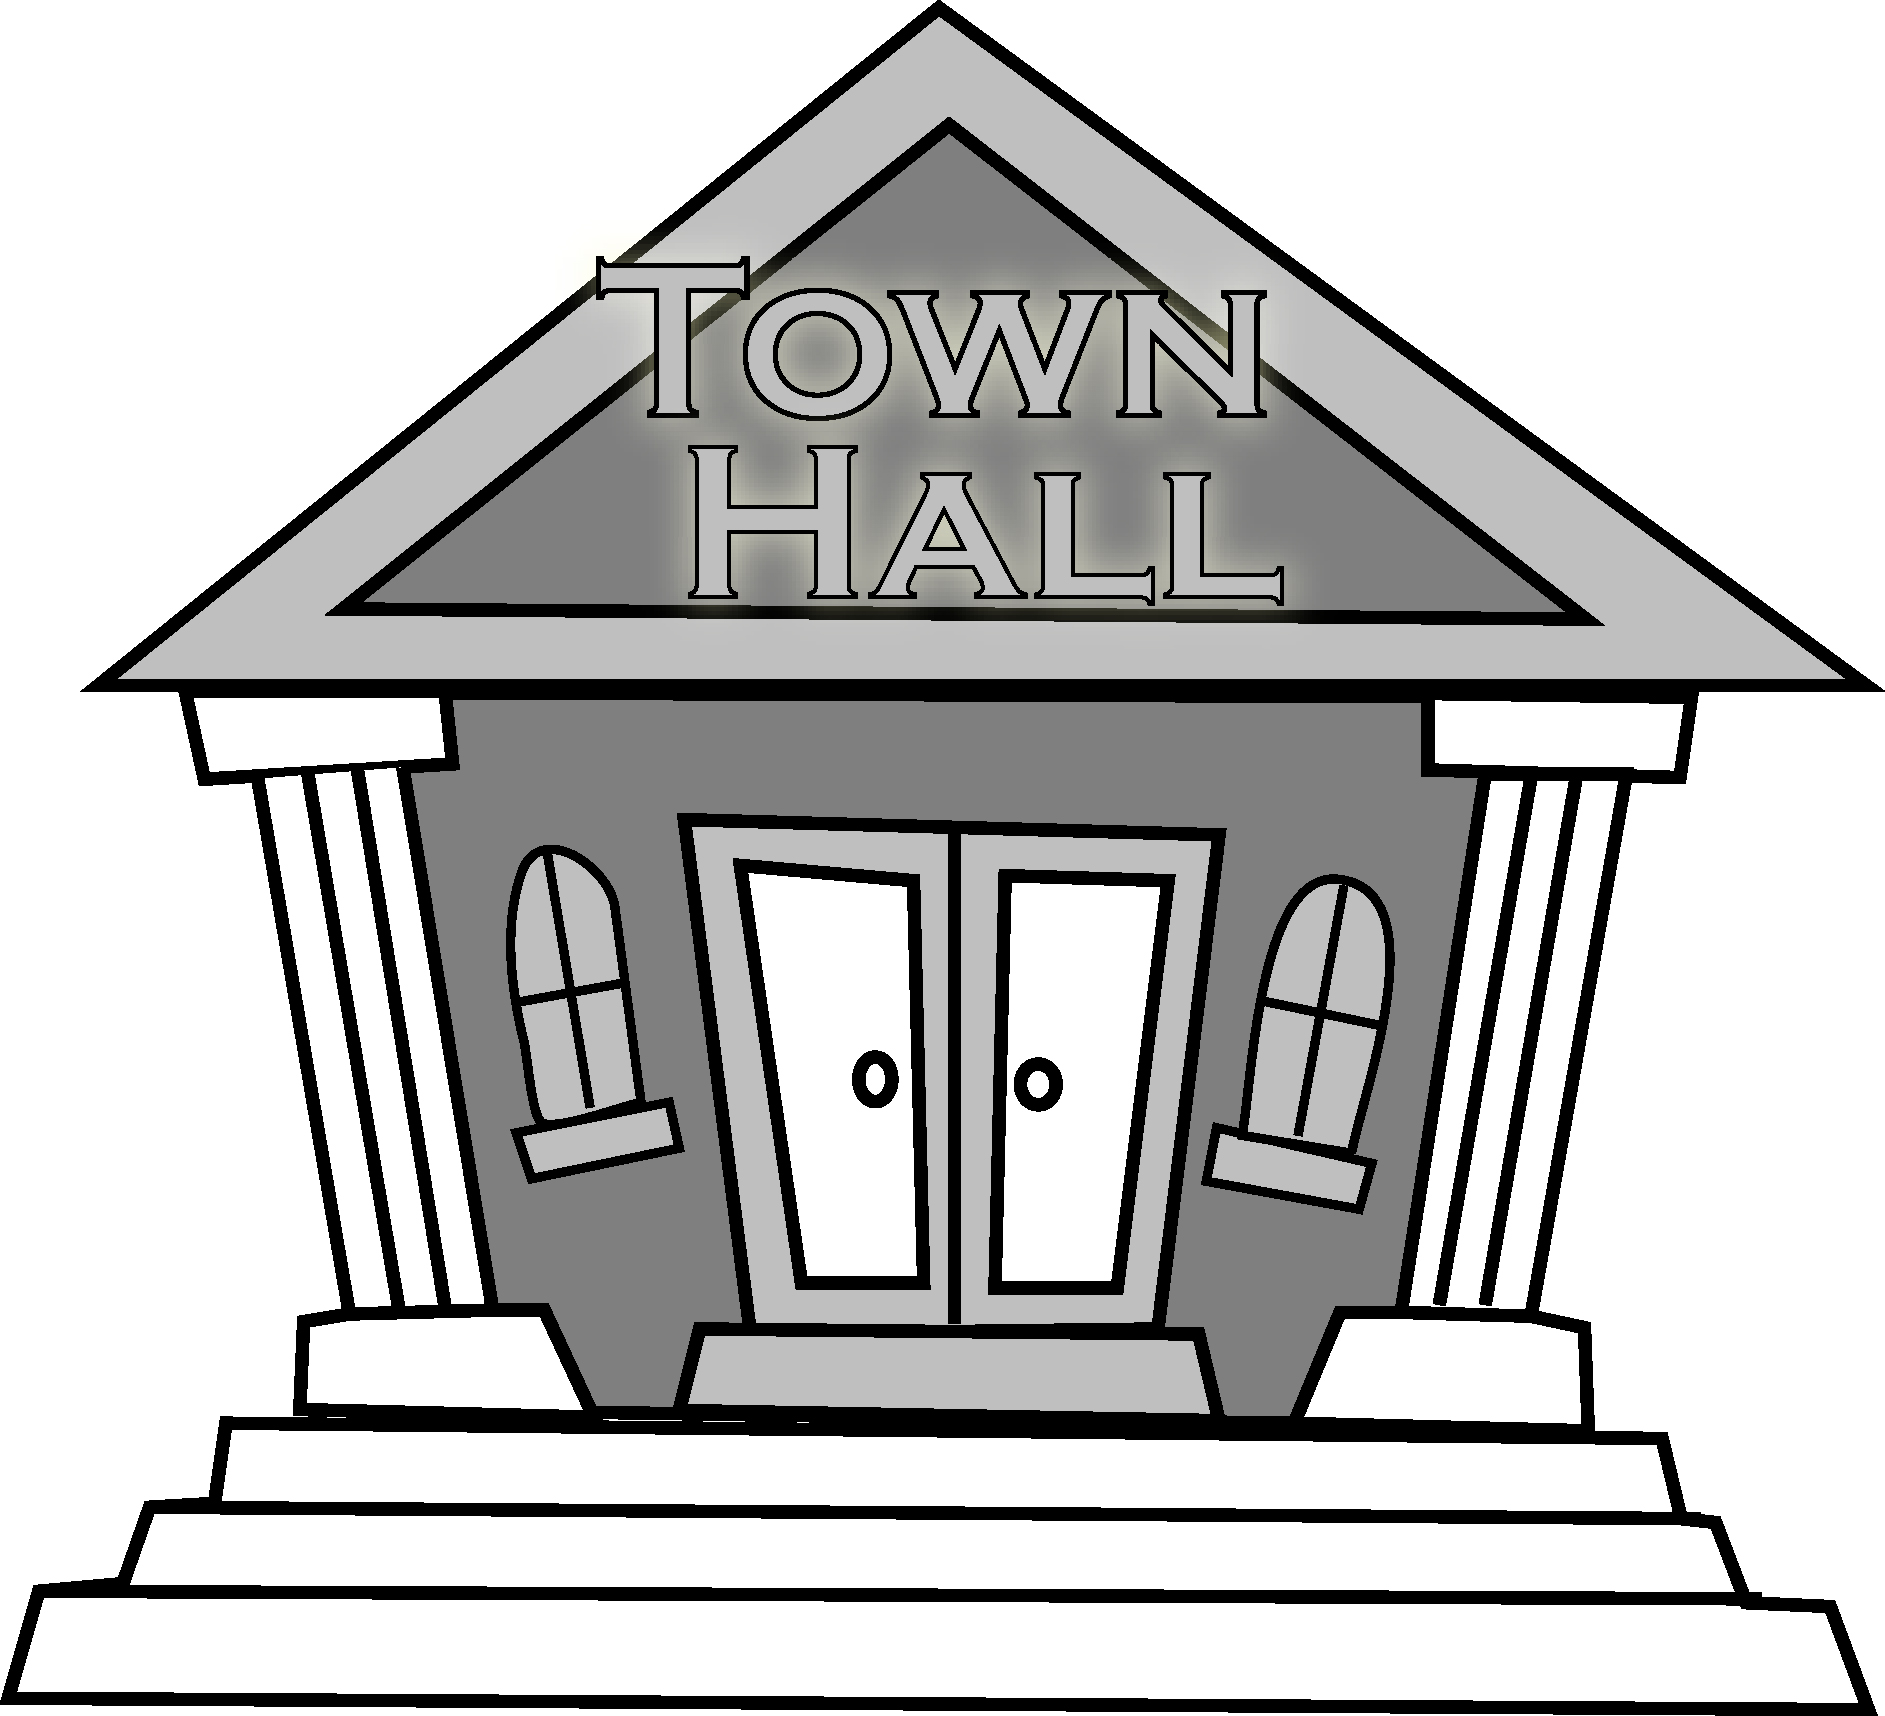 Town Hall Building Clipart #1 | Clipart Panda - Free Clipart Images